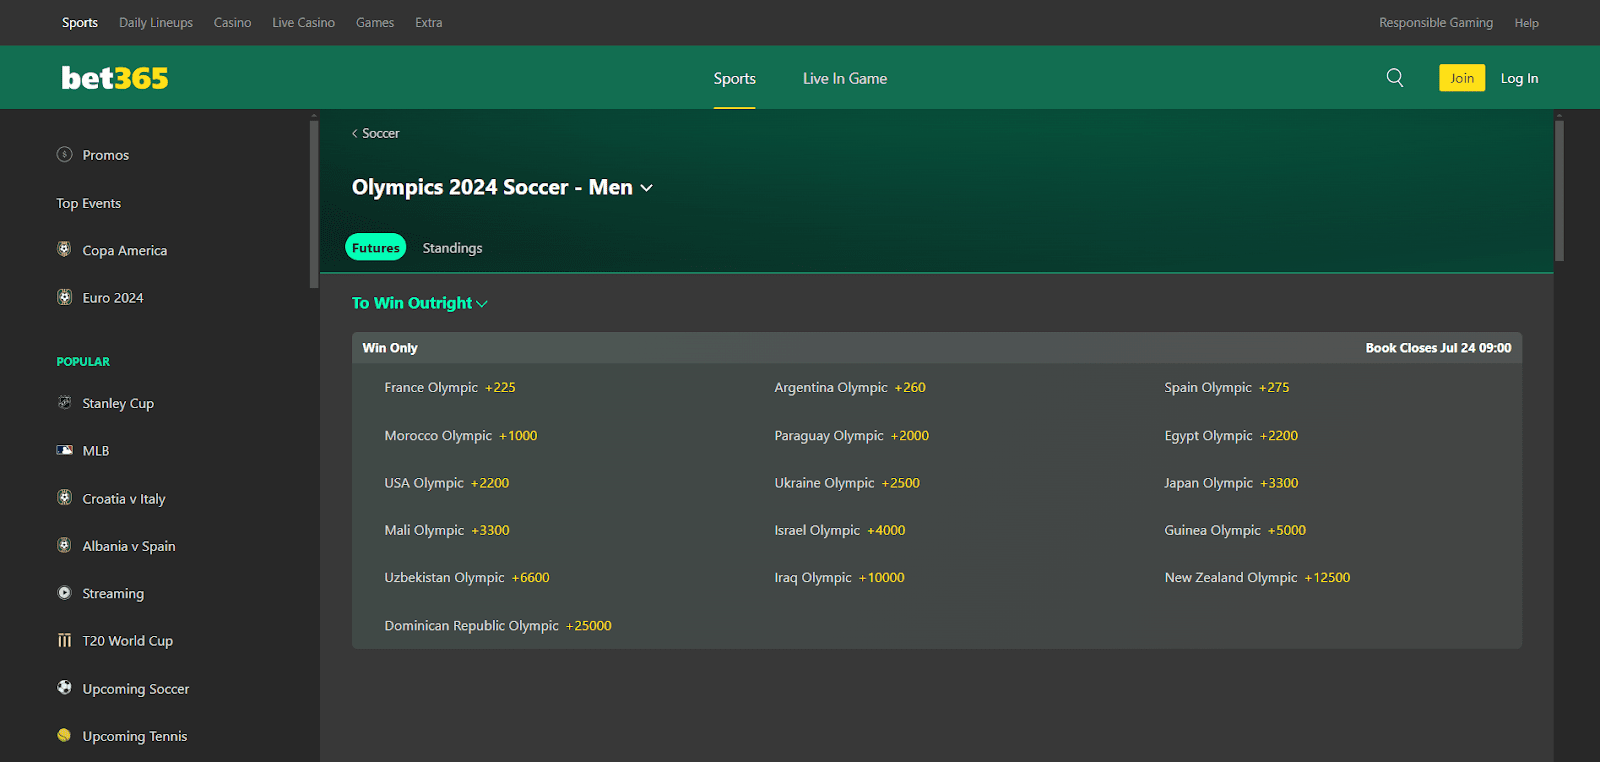 bet365 Olympics page